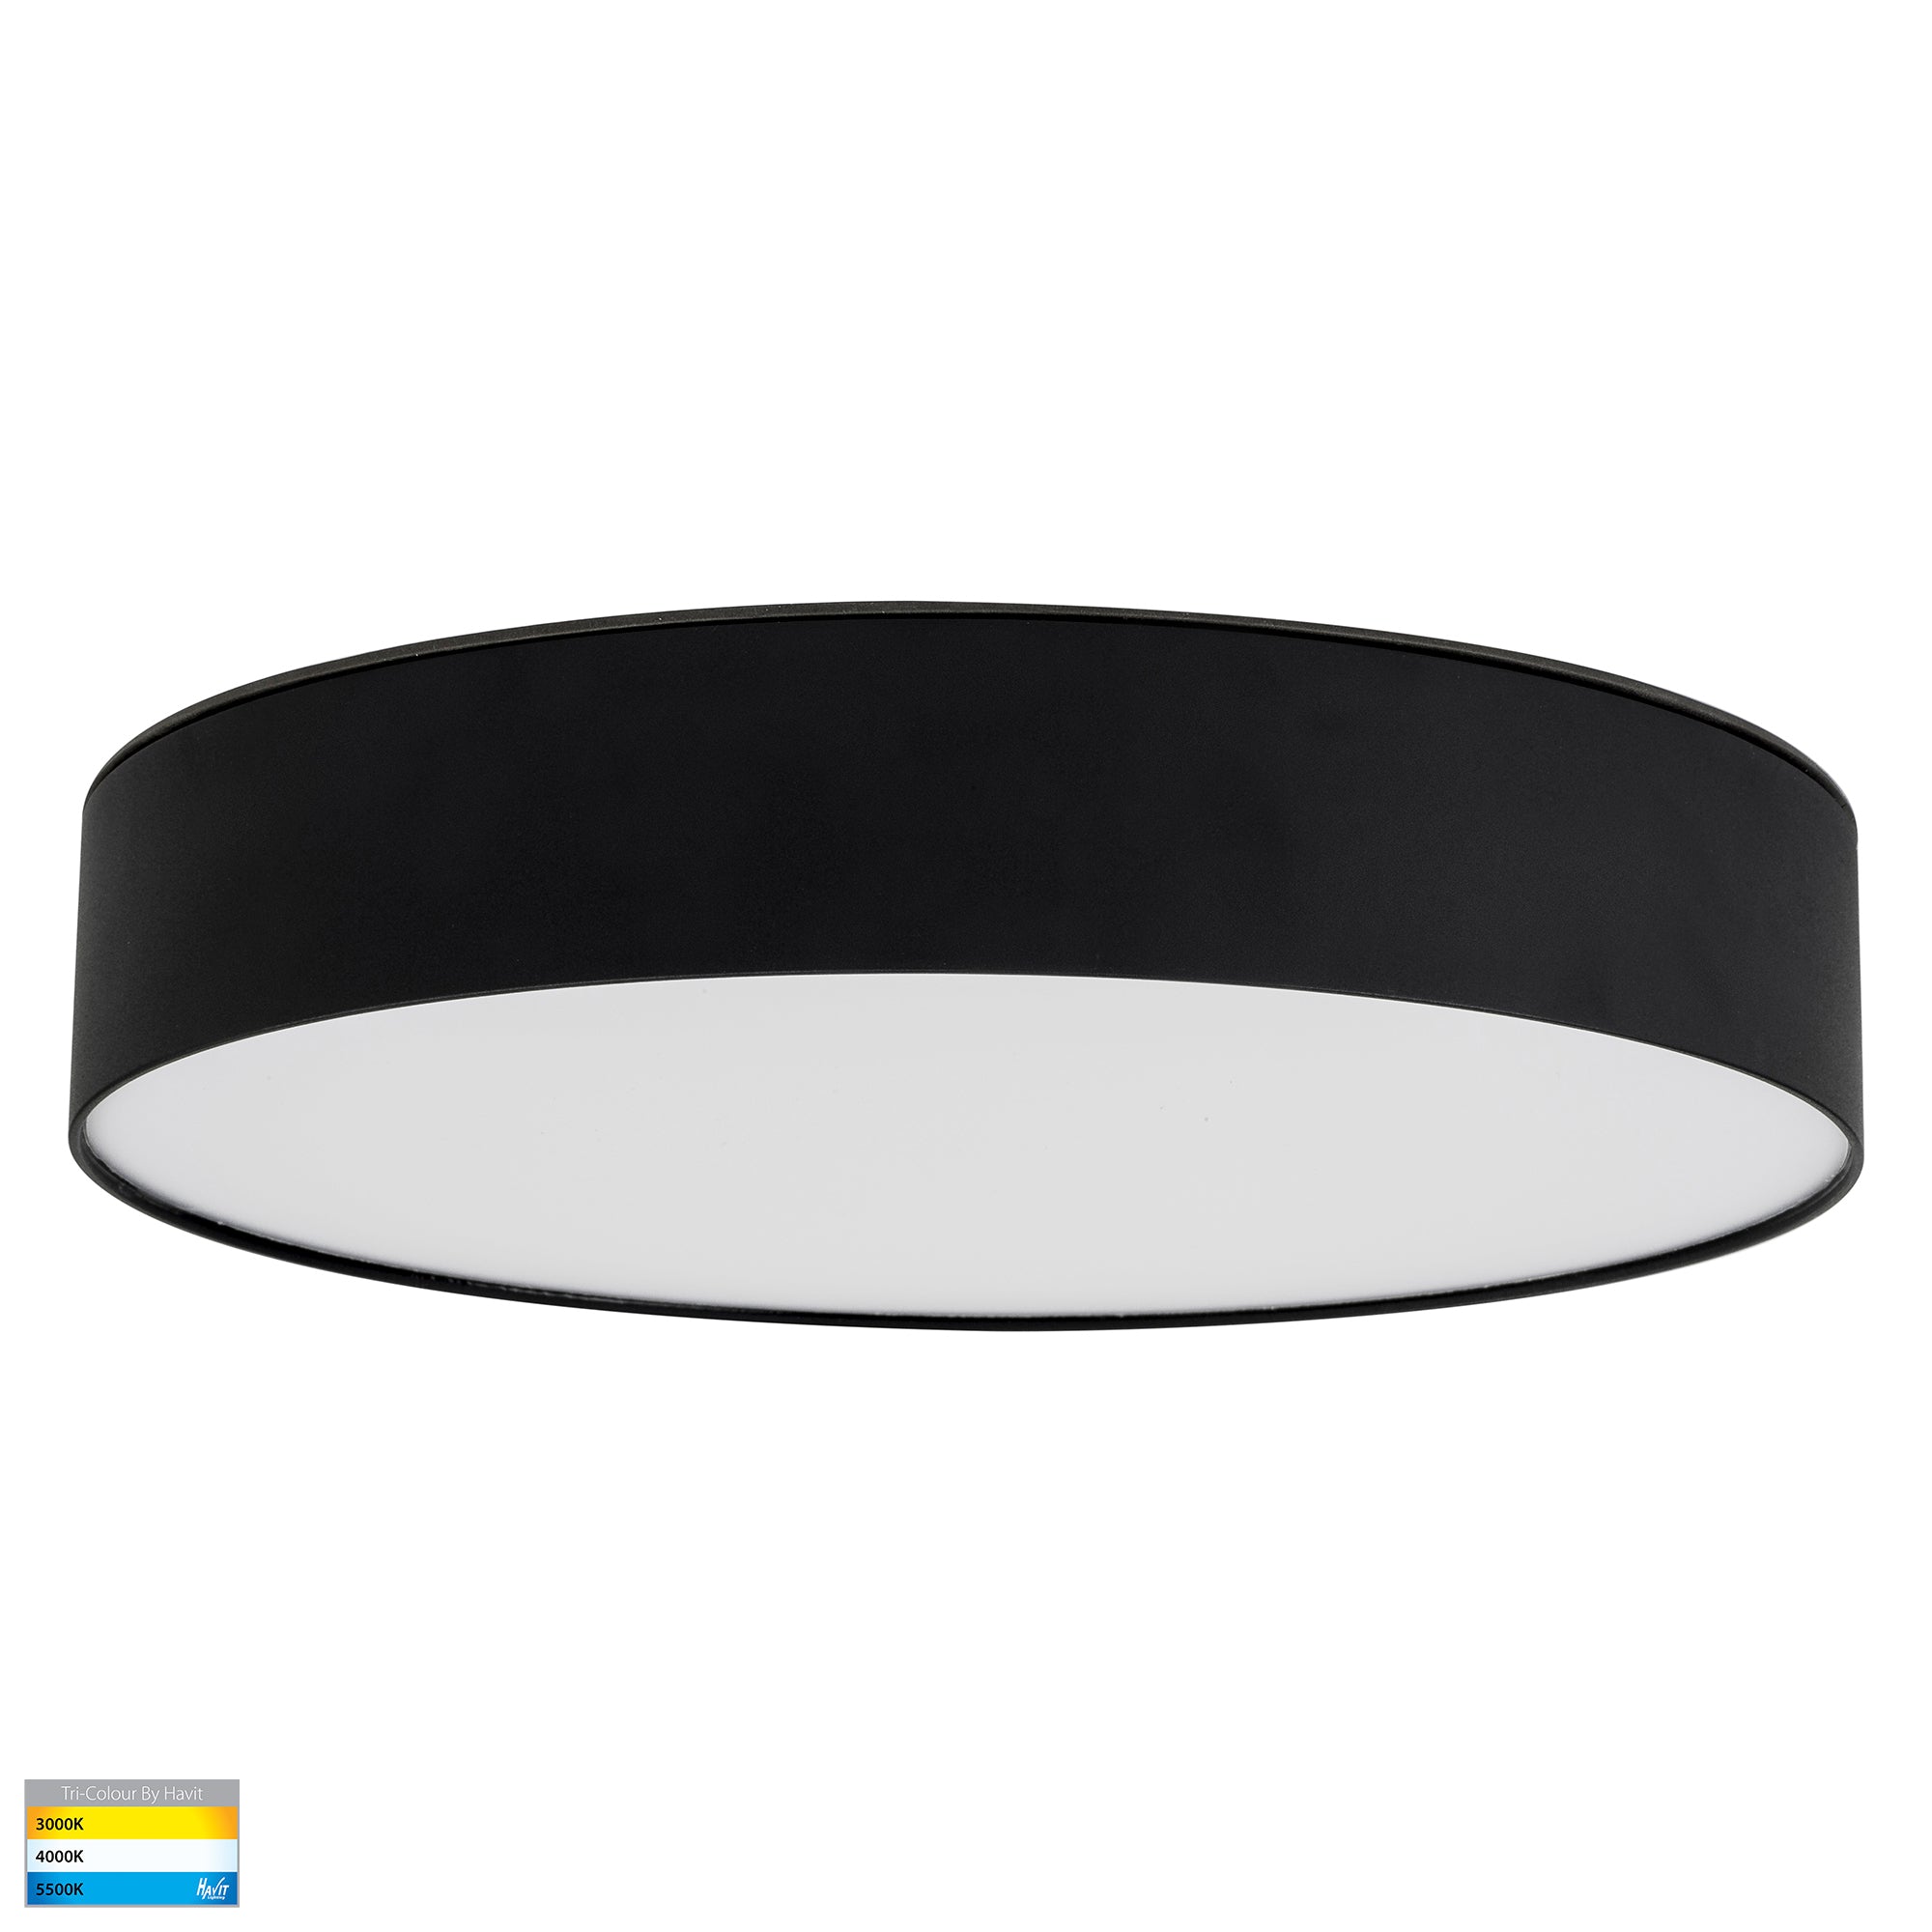 HV5893T-BLK - Nella Black 30w Ceiling Mounted LED Oyster